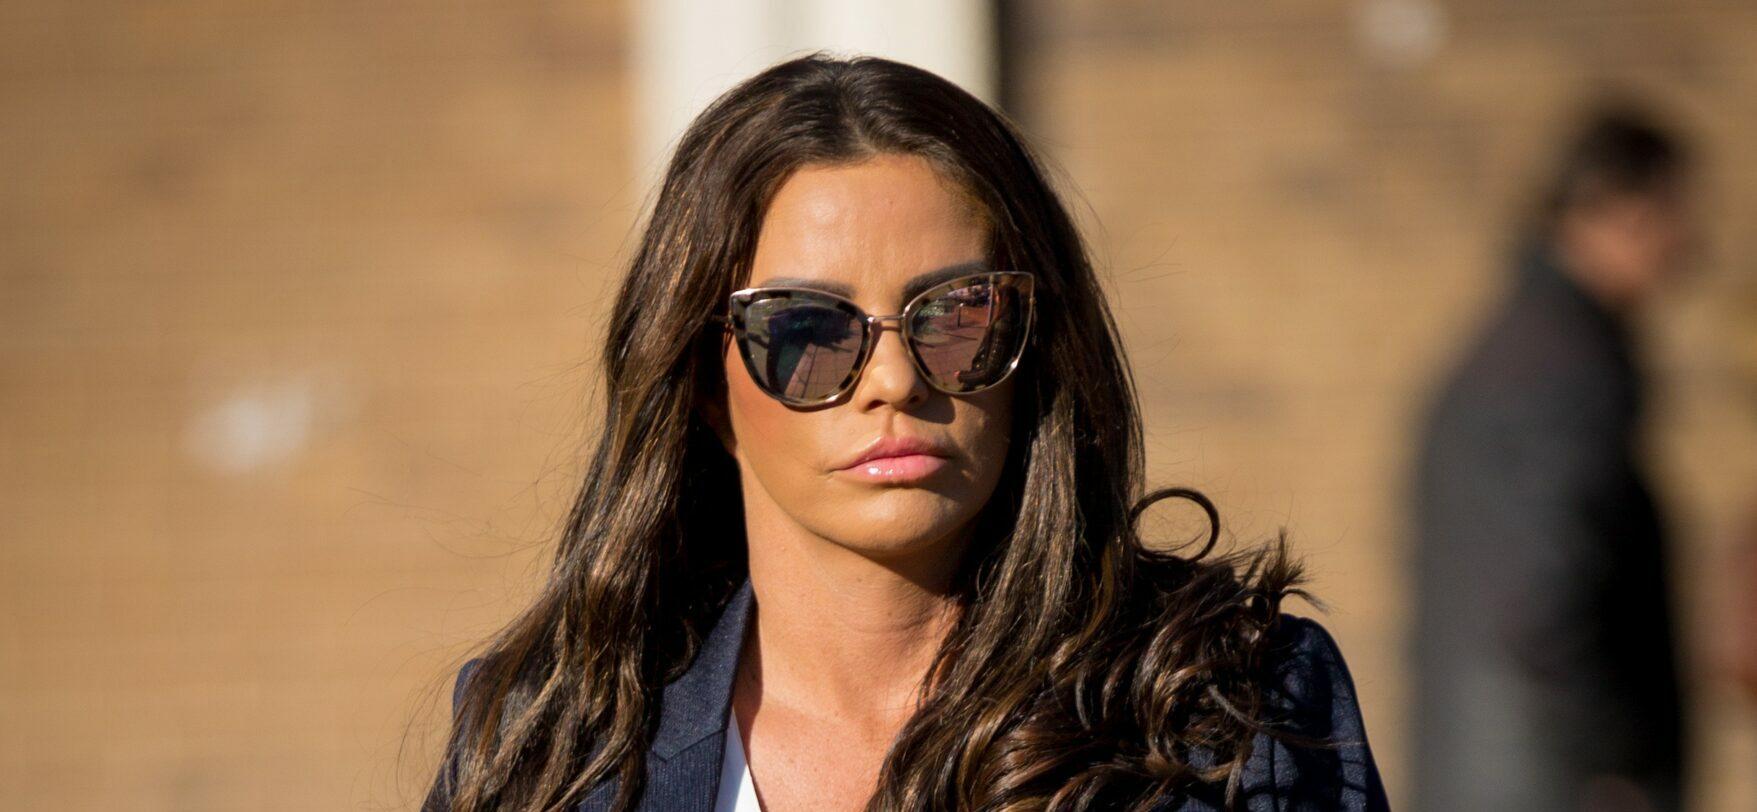 Katie Price Unwinds With Fiancé Carl Woods Amid Restraining Order Breach Charge